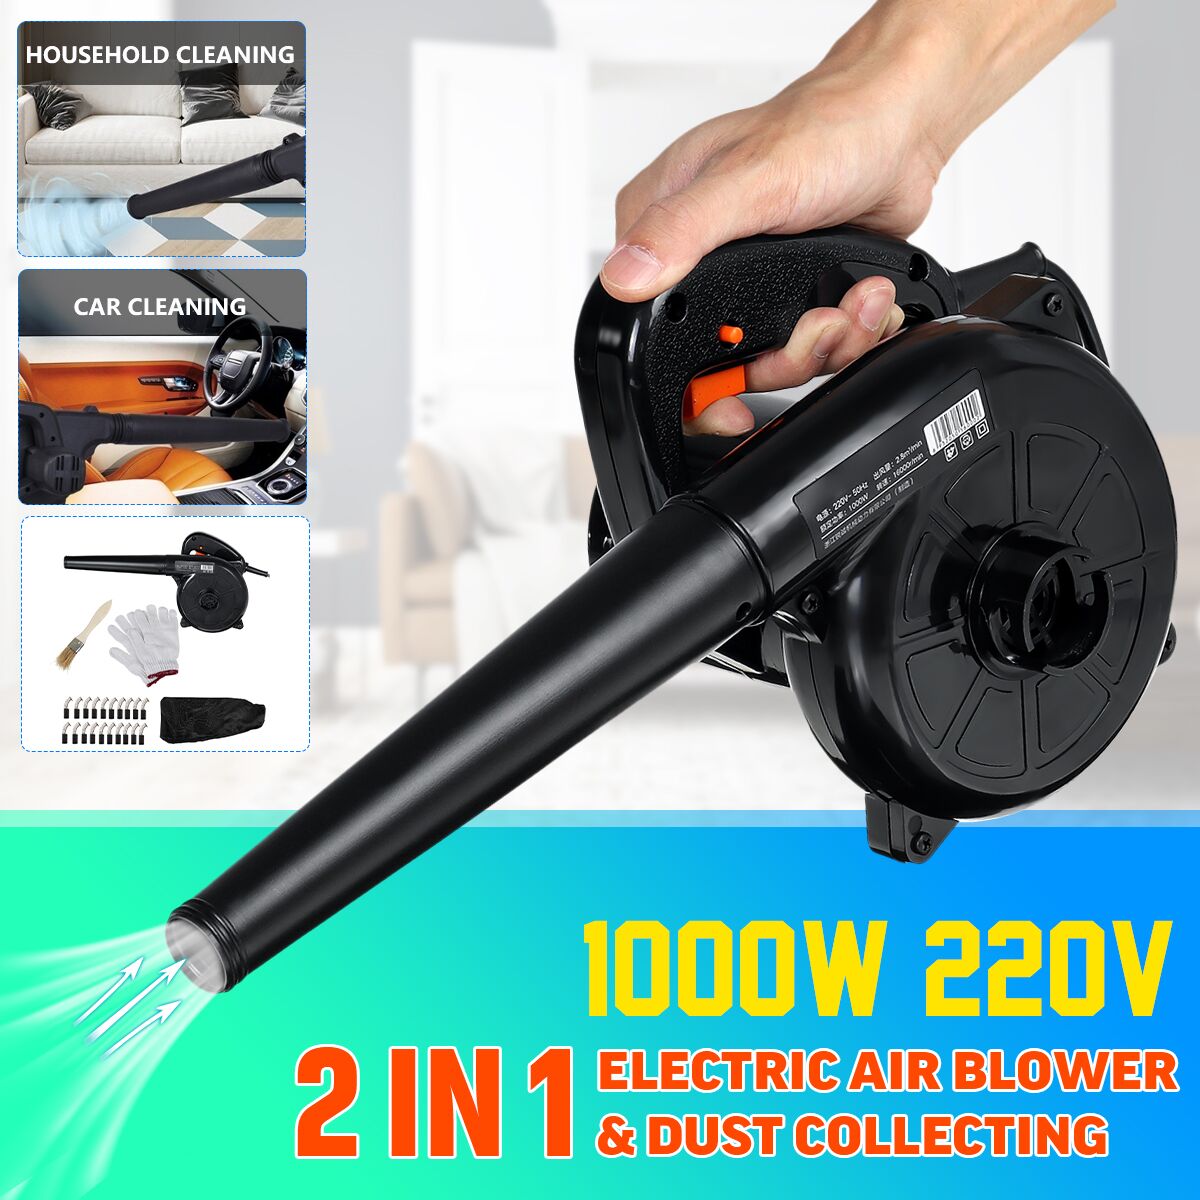 1000W-220V-2-in-1-Electric-Air-Blower-16000rmin-Handheld-Blowing--Dust-Collecting-Mechine-1735961-1